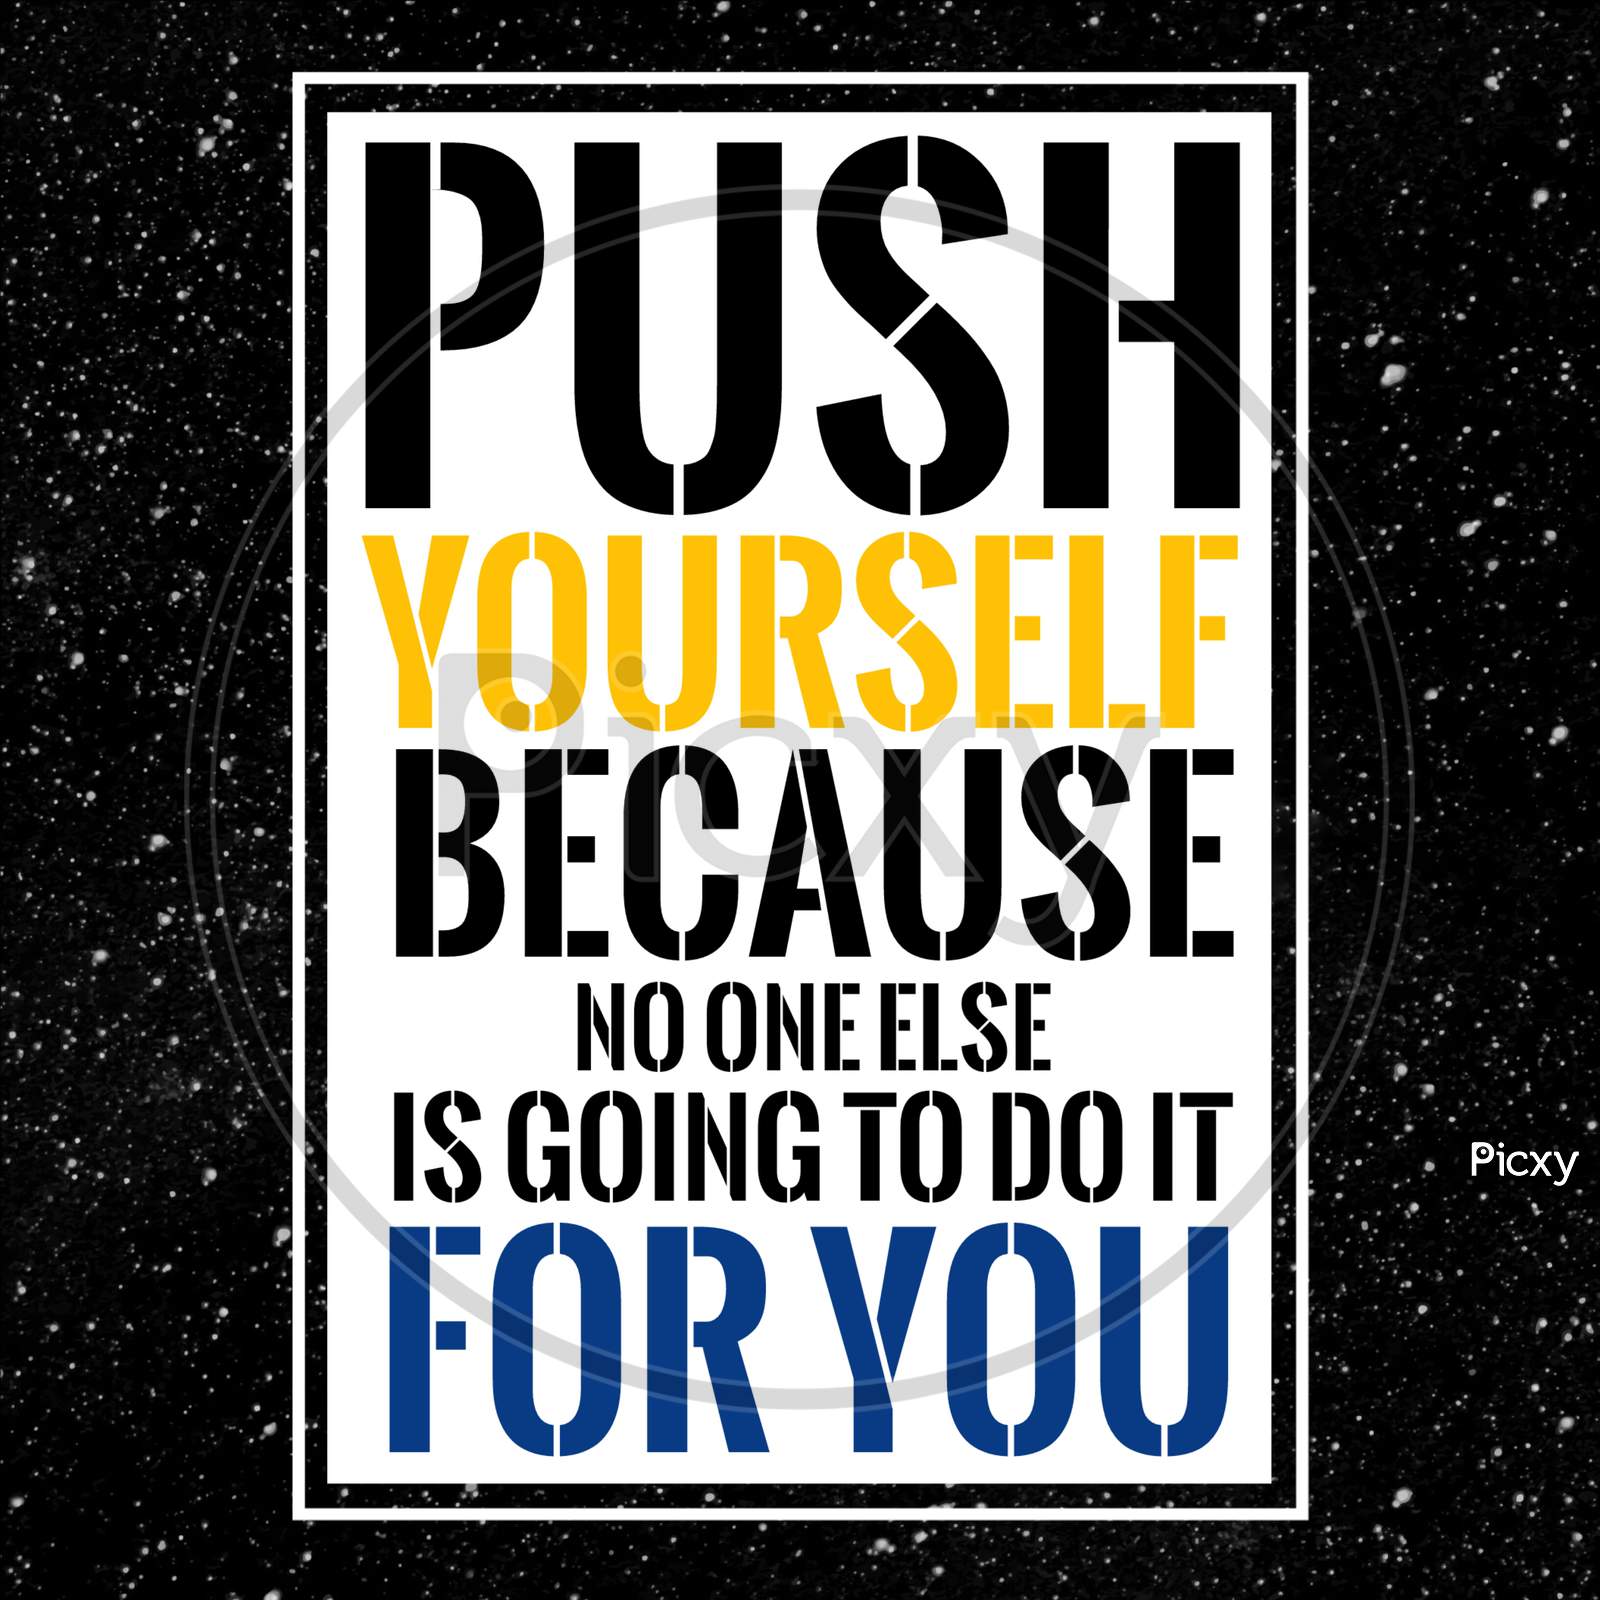 Push Yourself Because No One Else Is Going To Do It For You (black background with black color fonts)